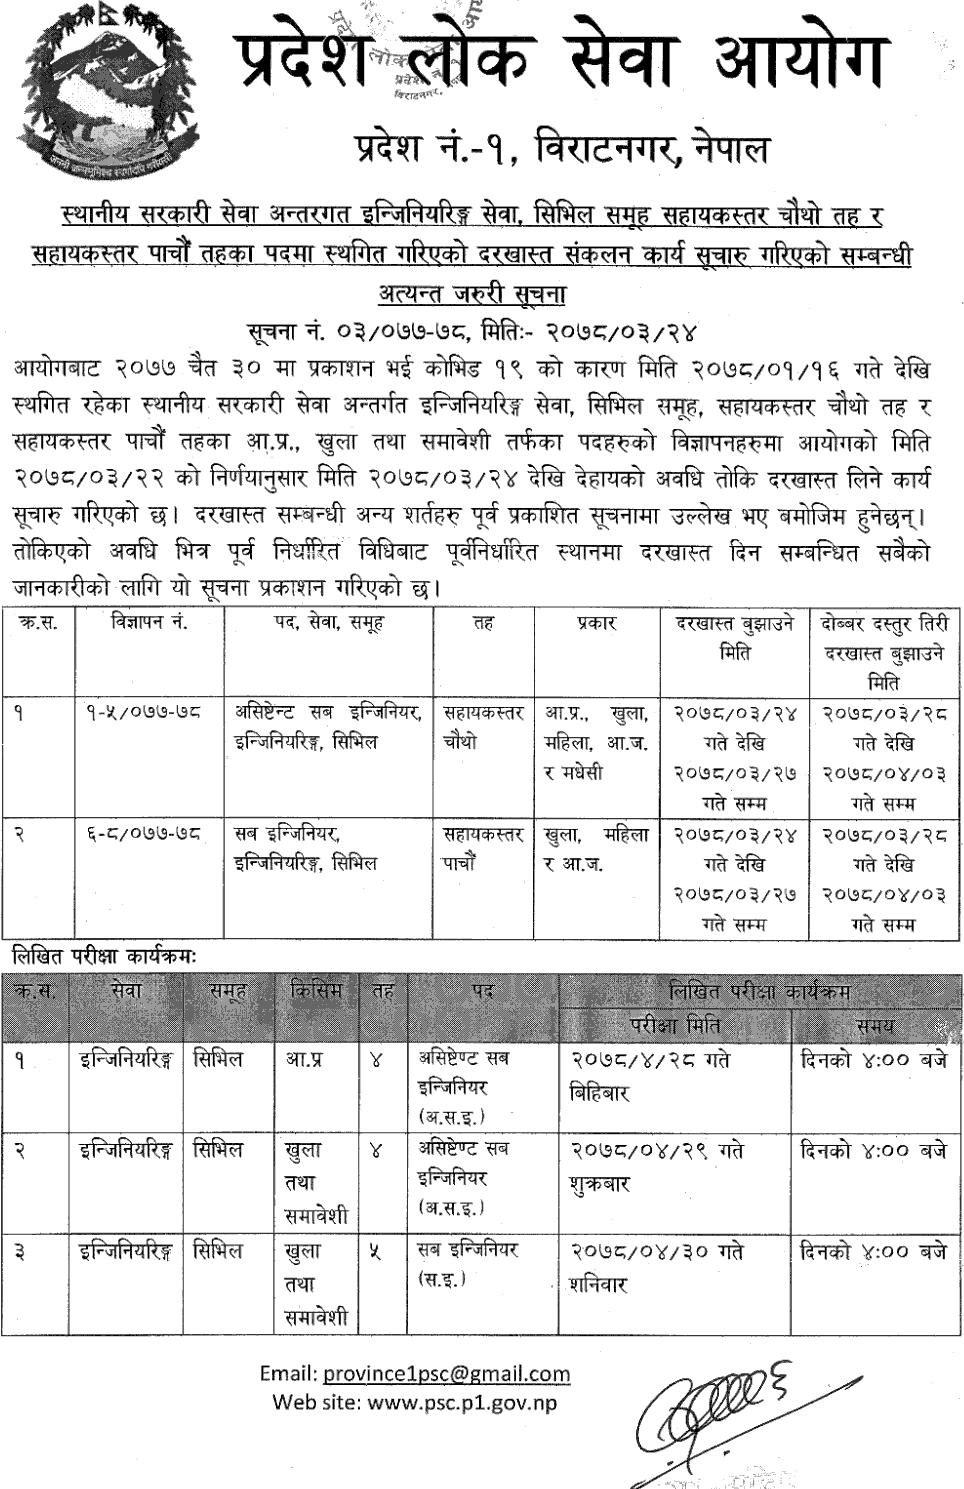 Province Public Service Commission Province 1 Exam Schedule of 4th and 5th Level Assistant (Engineering Service)